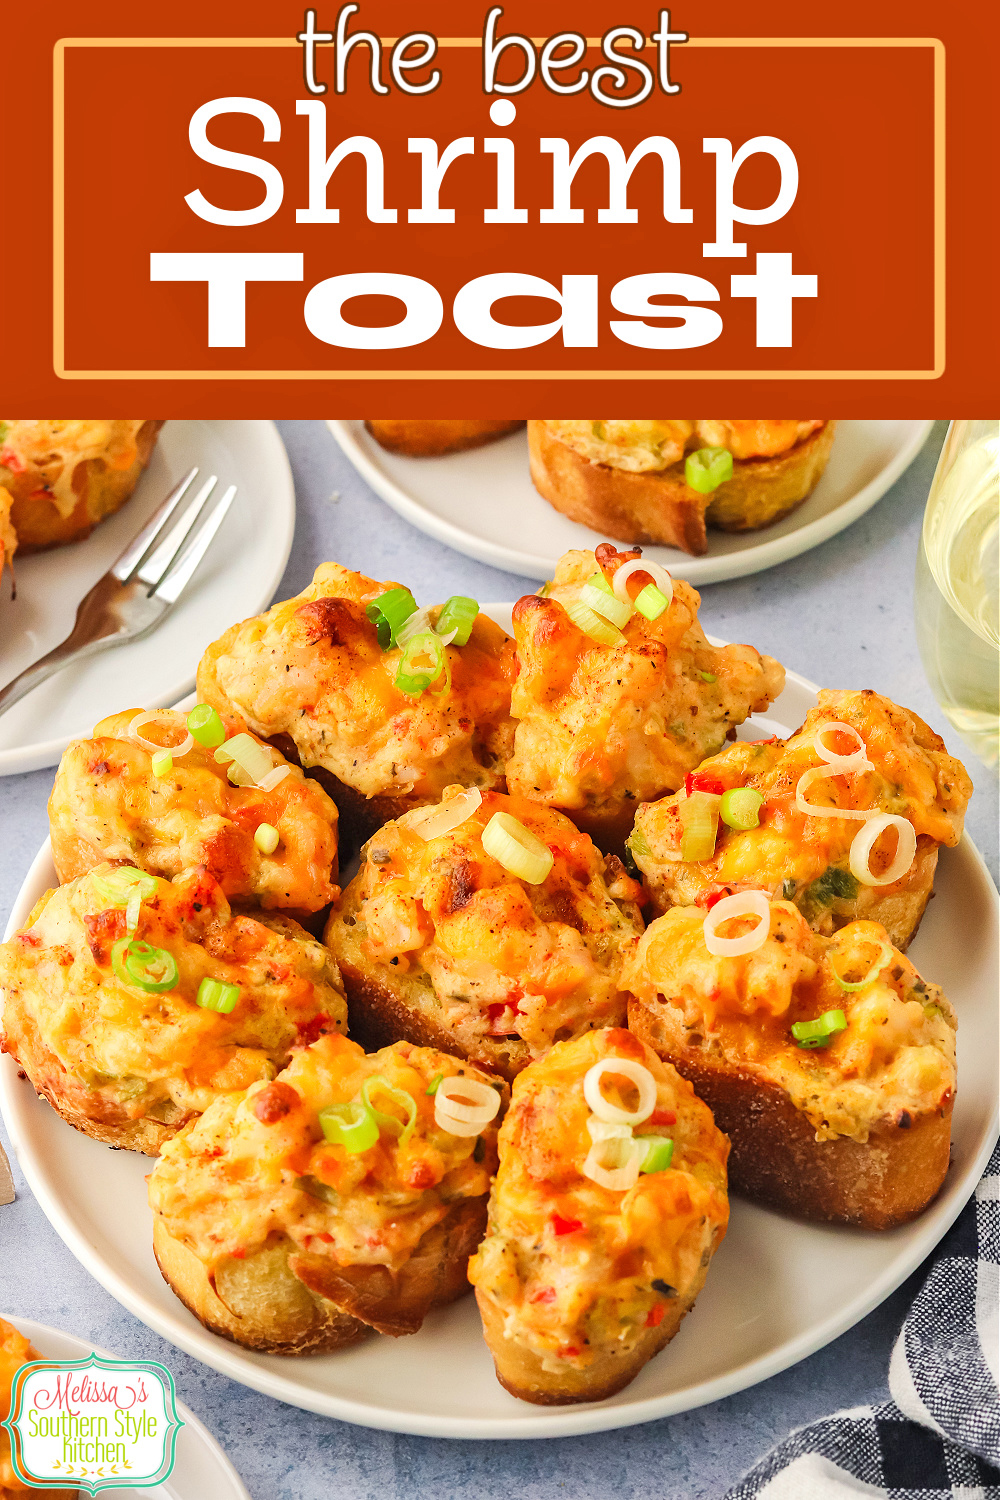 This Shrimp Toast Recipe is an easy appetizer to serve for parties, game day snacks, the holidays or any time small bites are on the menu. #shrimprecipes #shrimptoast #easyappetizers #appetizerrecipes #seafood #seafoodrecipes via @melissasssk